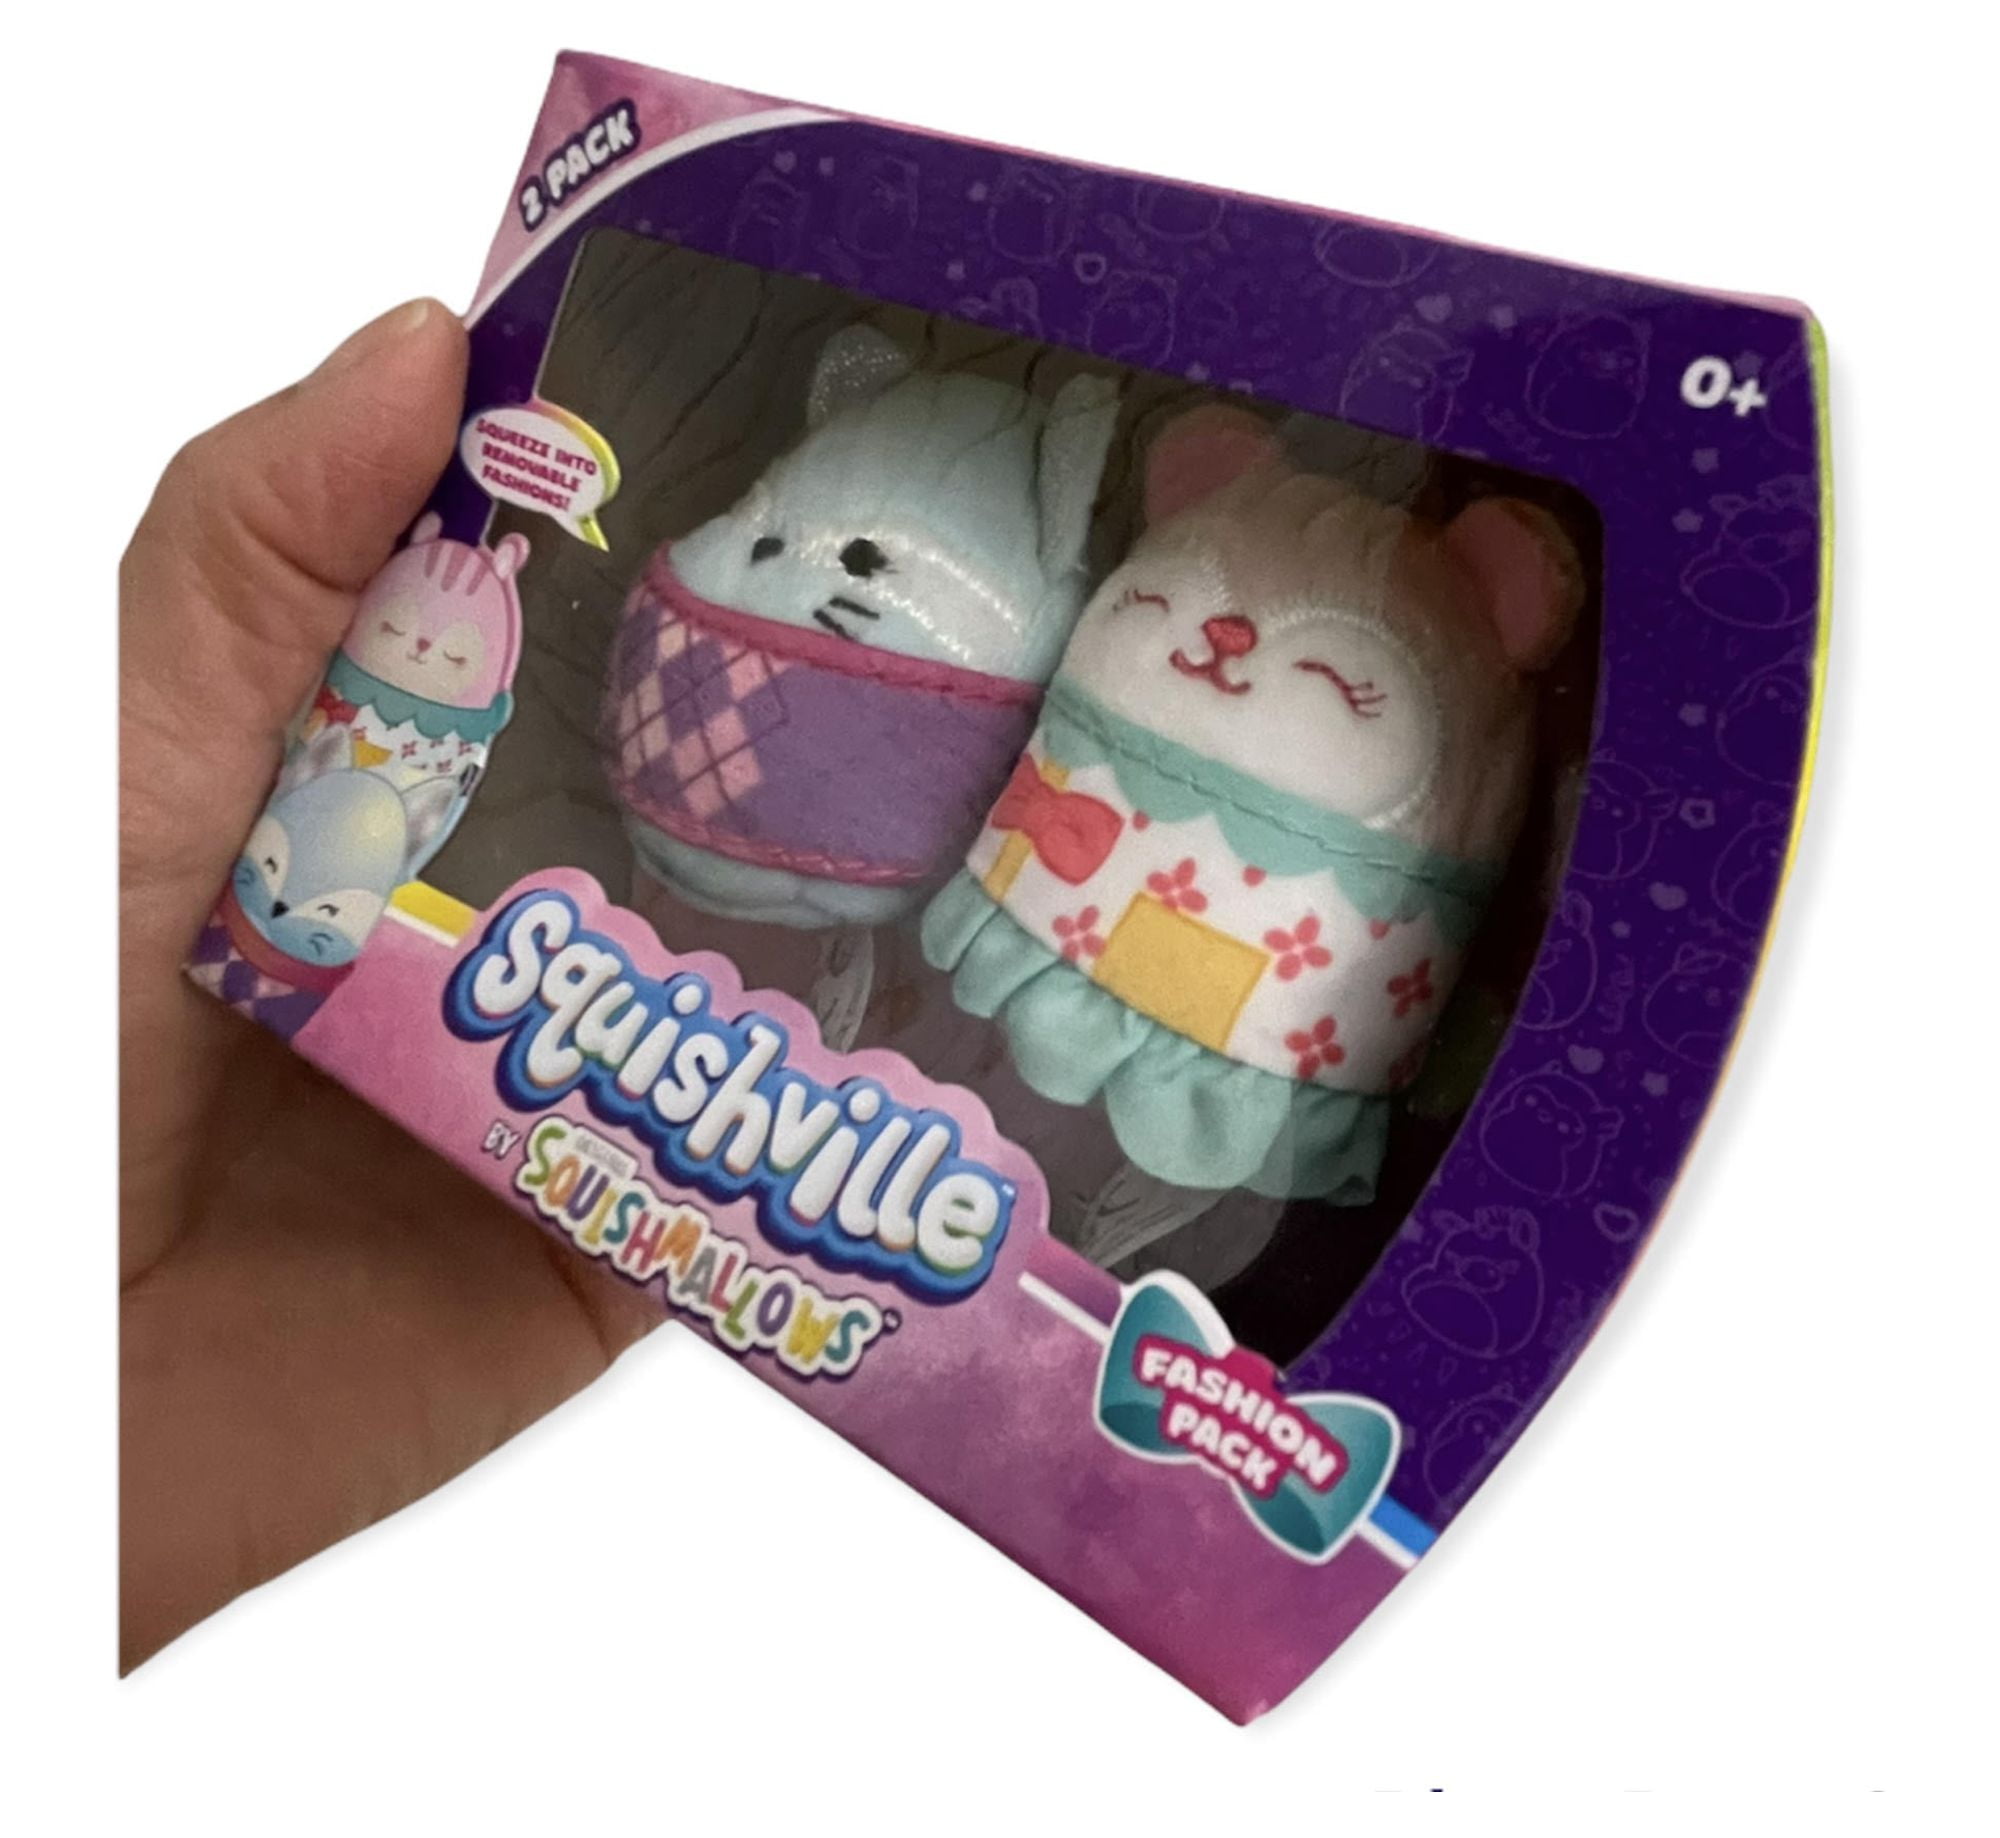 Miles and Lindsay ~ Mini Fashion 2 Pack Squishville Plush ~ IN